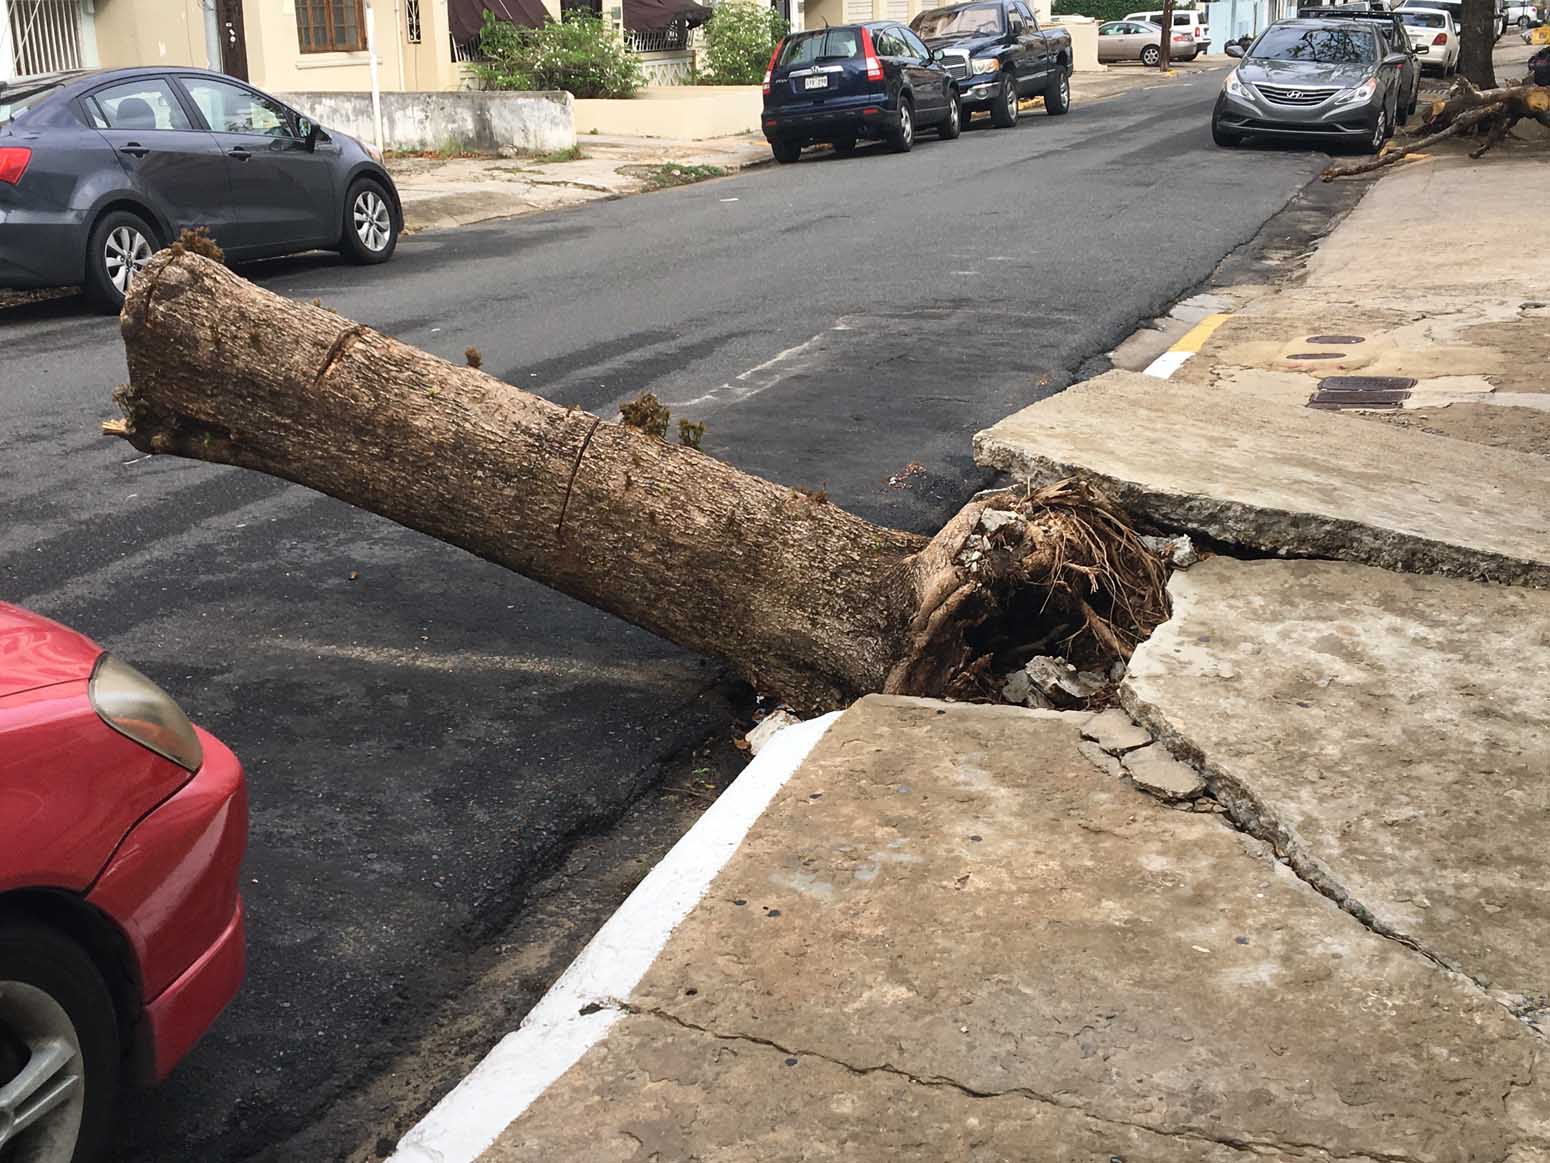 Toppled tree trunks - a very common sight in Condado